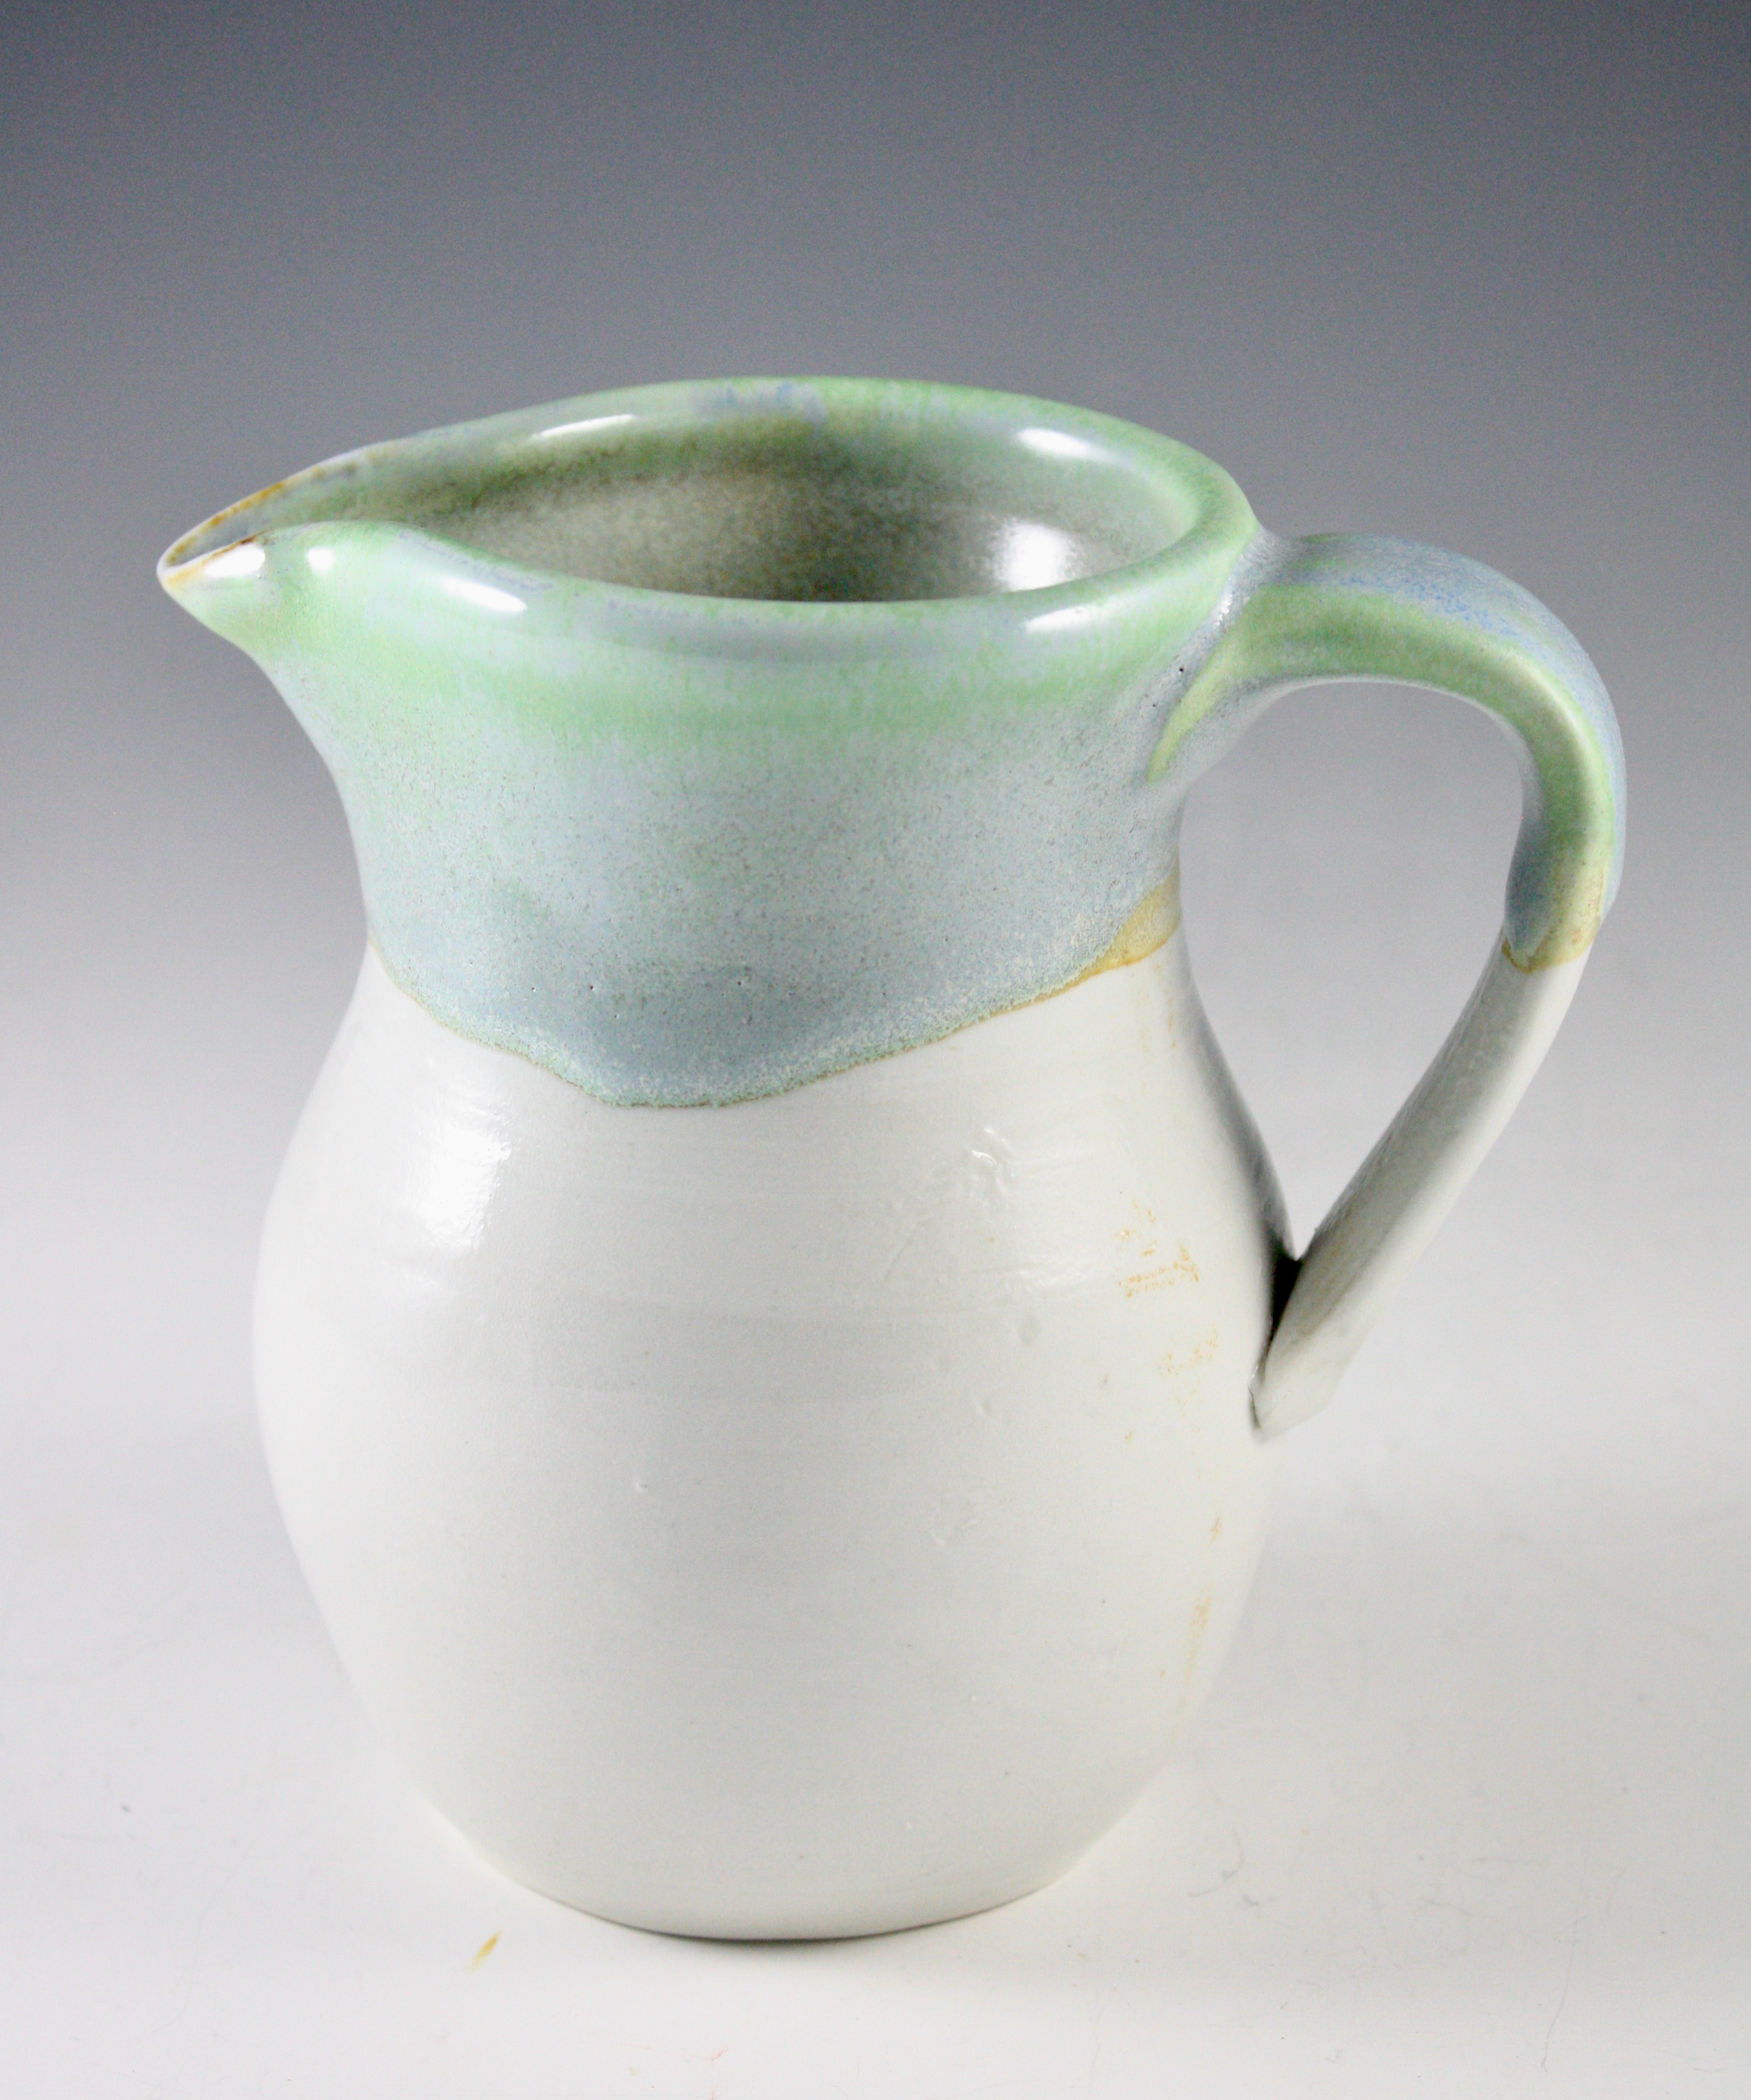 Porcelain Pitcher with Blue Green Rim 21-324